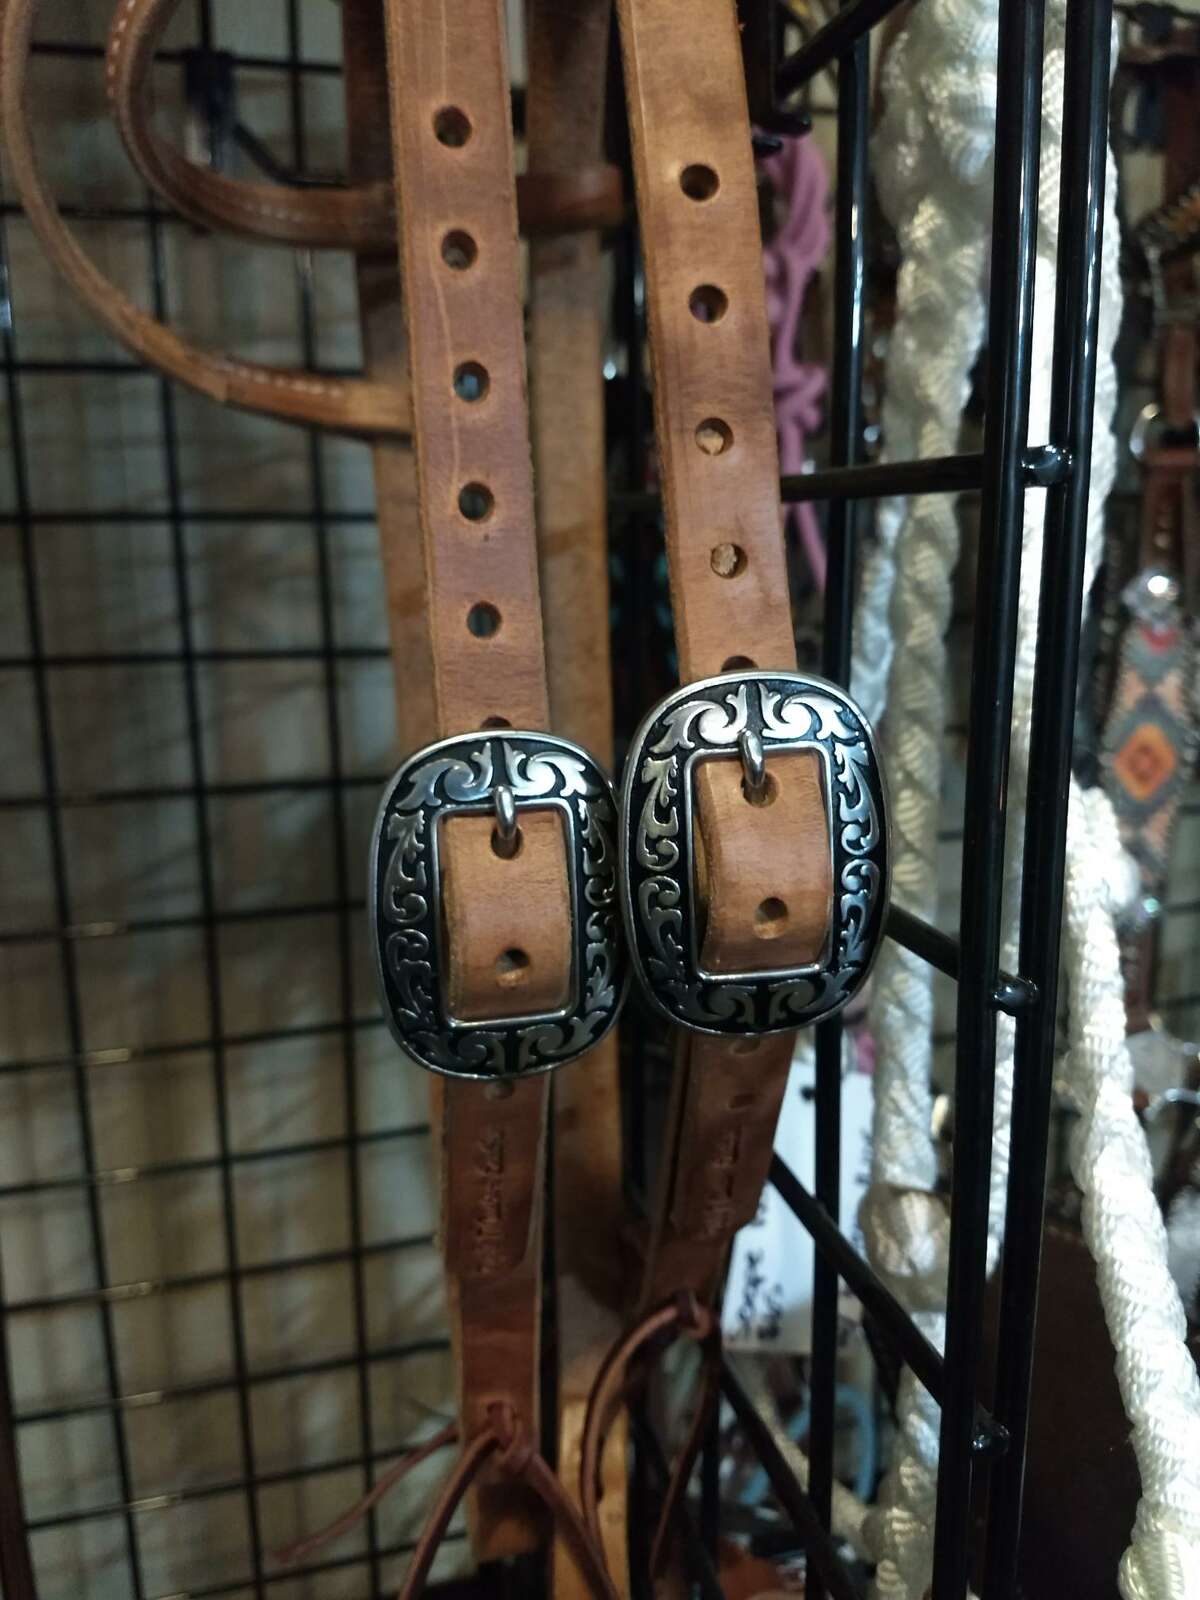 Taylor Whaling has turned her passion into her own business called Triple T Custom Leather, where she crafts and sells various leather items, such as belts, reins, patch hats and bronc halters. 